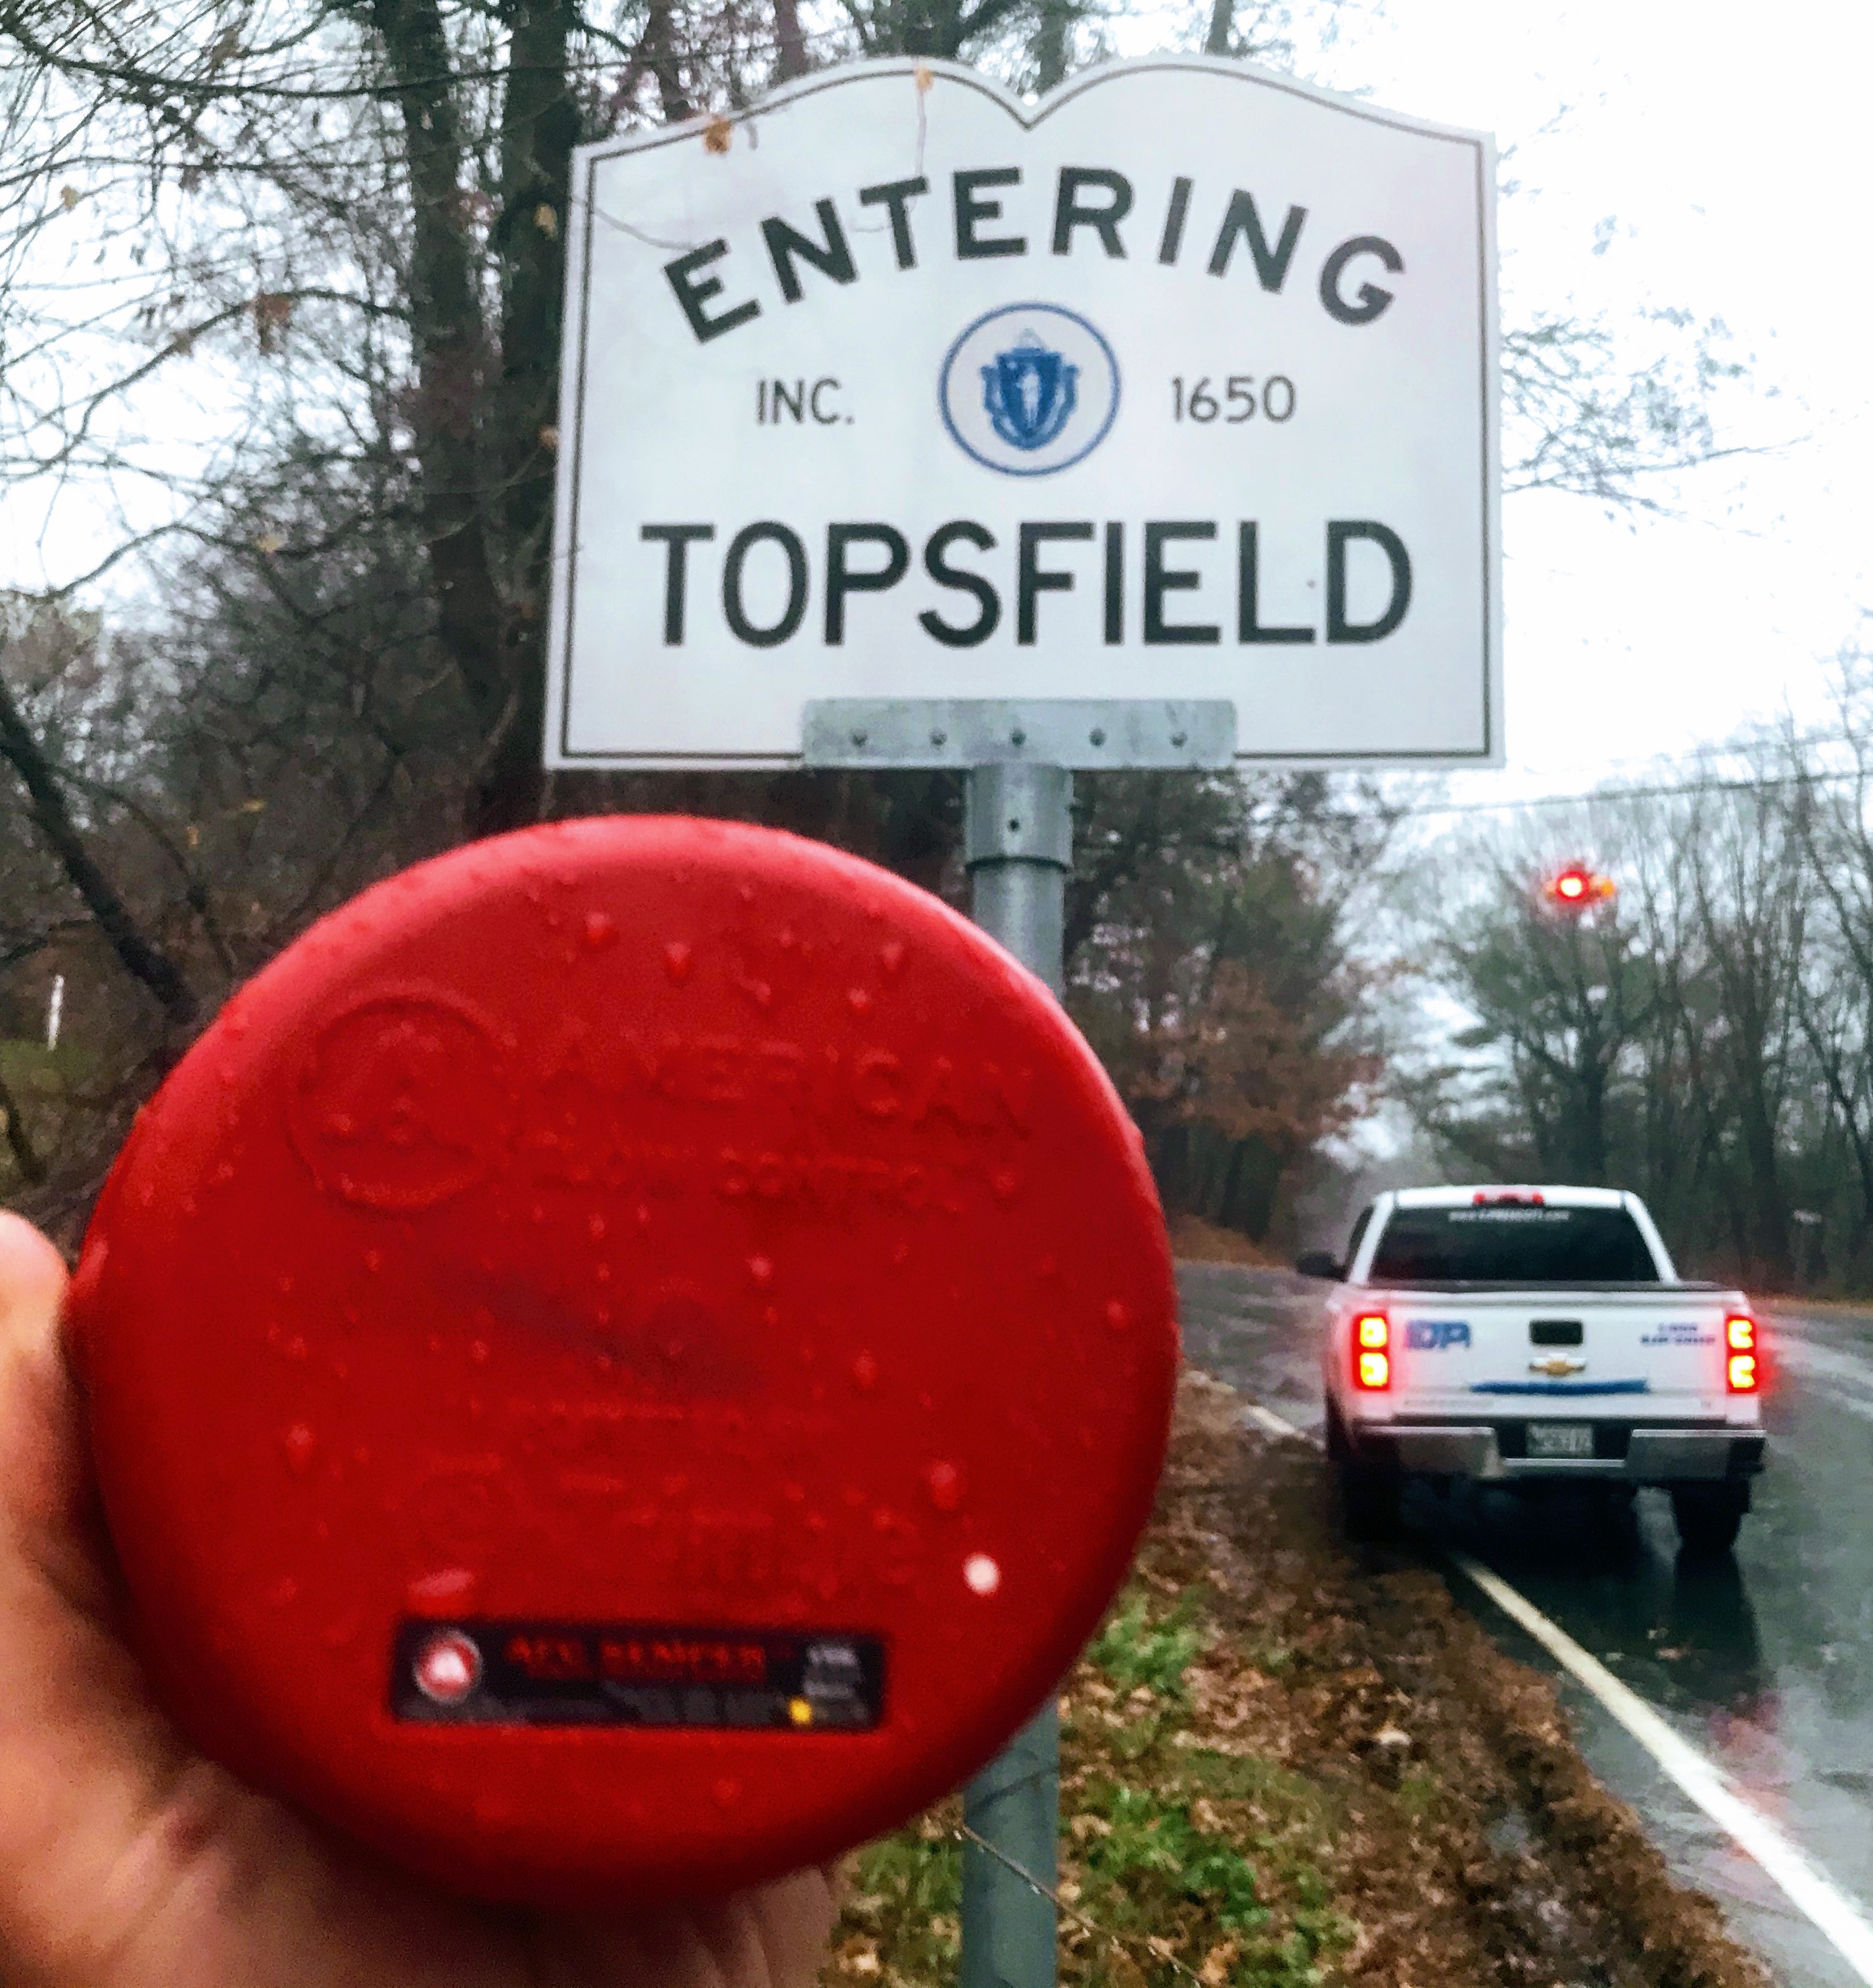 The Topsfield Water Department purchased three of the AFC SEMPER RPMs and deployed them in November 2020. The units have helped the water department identify water hammer and other system pressure issues before they become a problem.